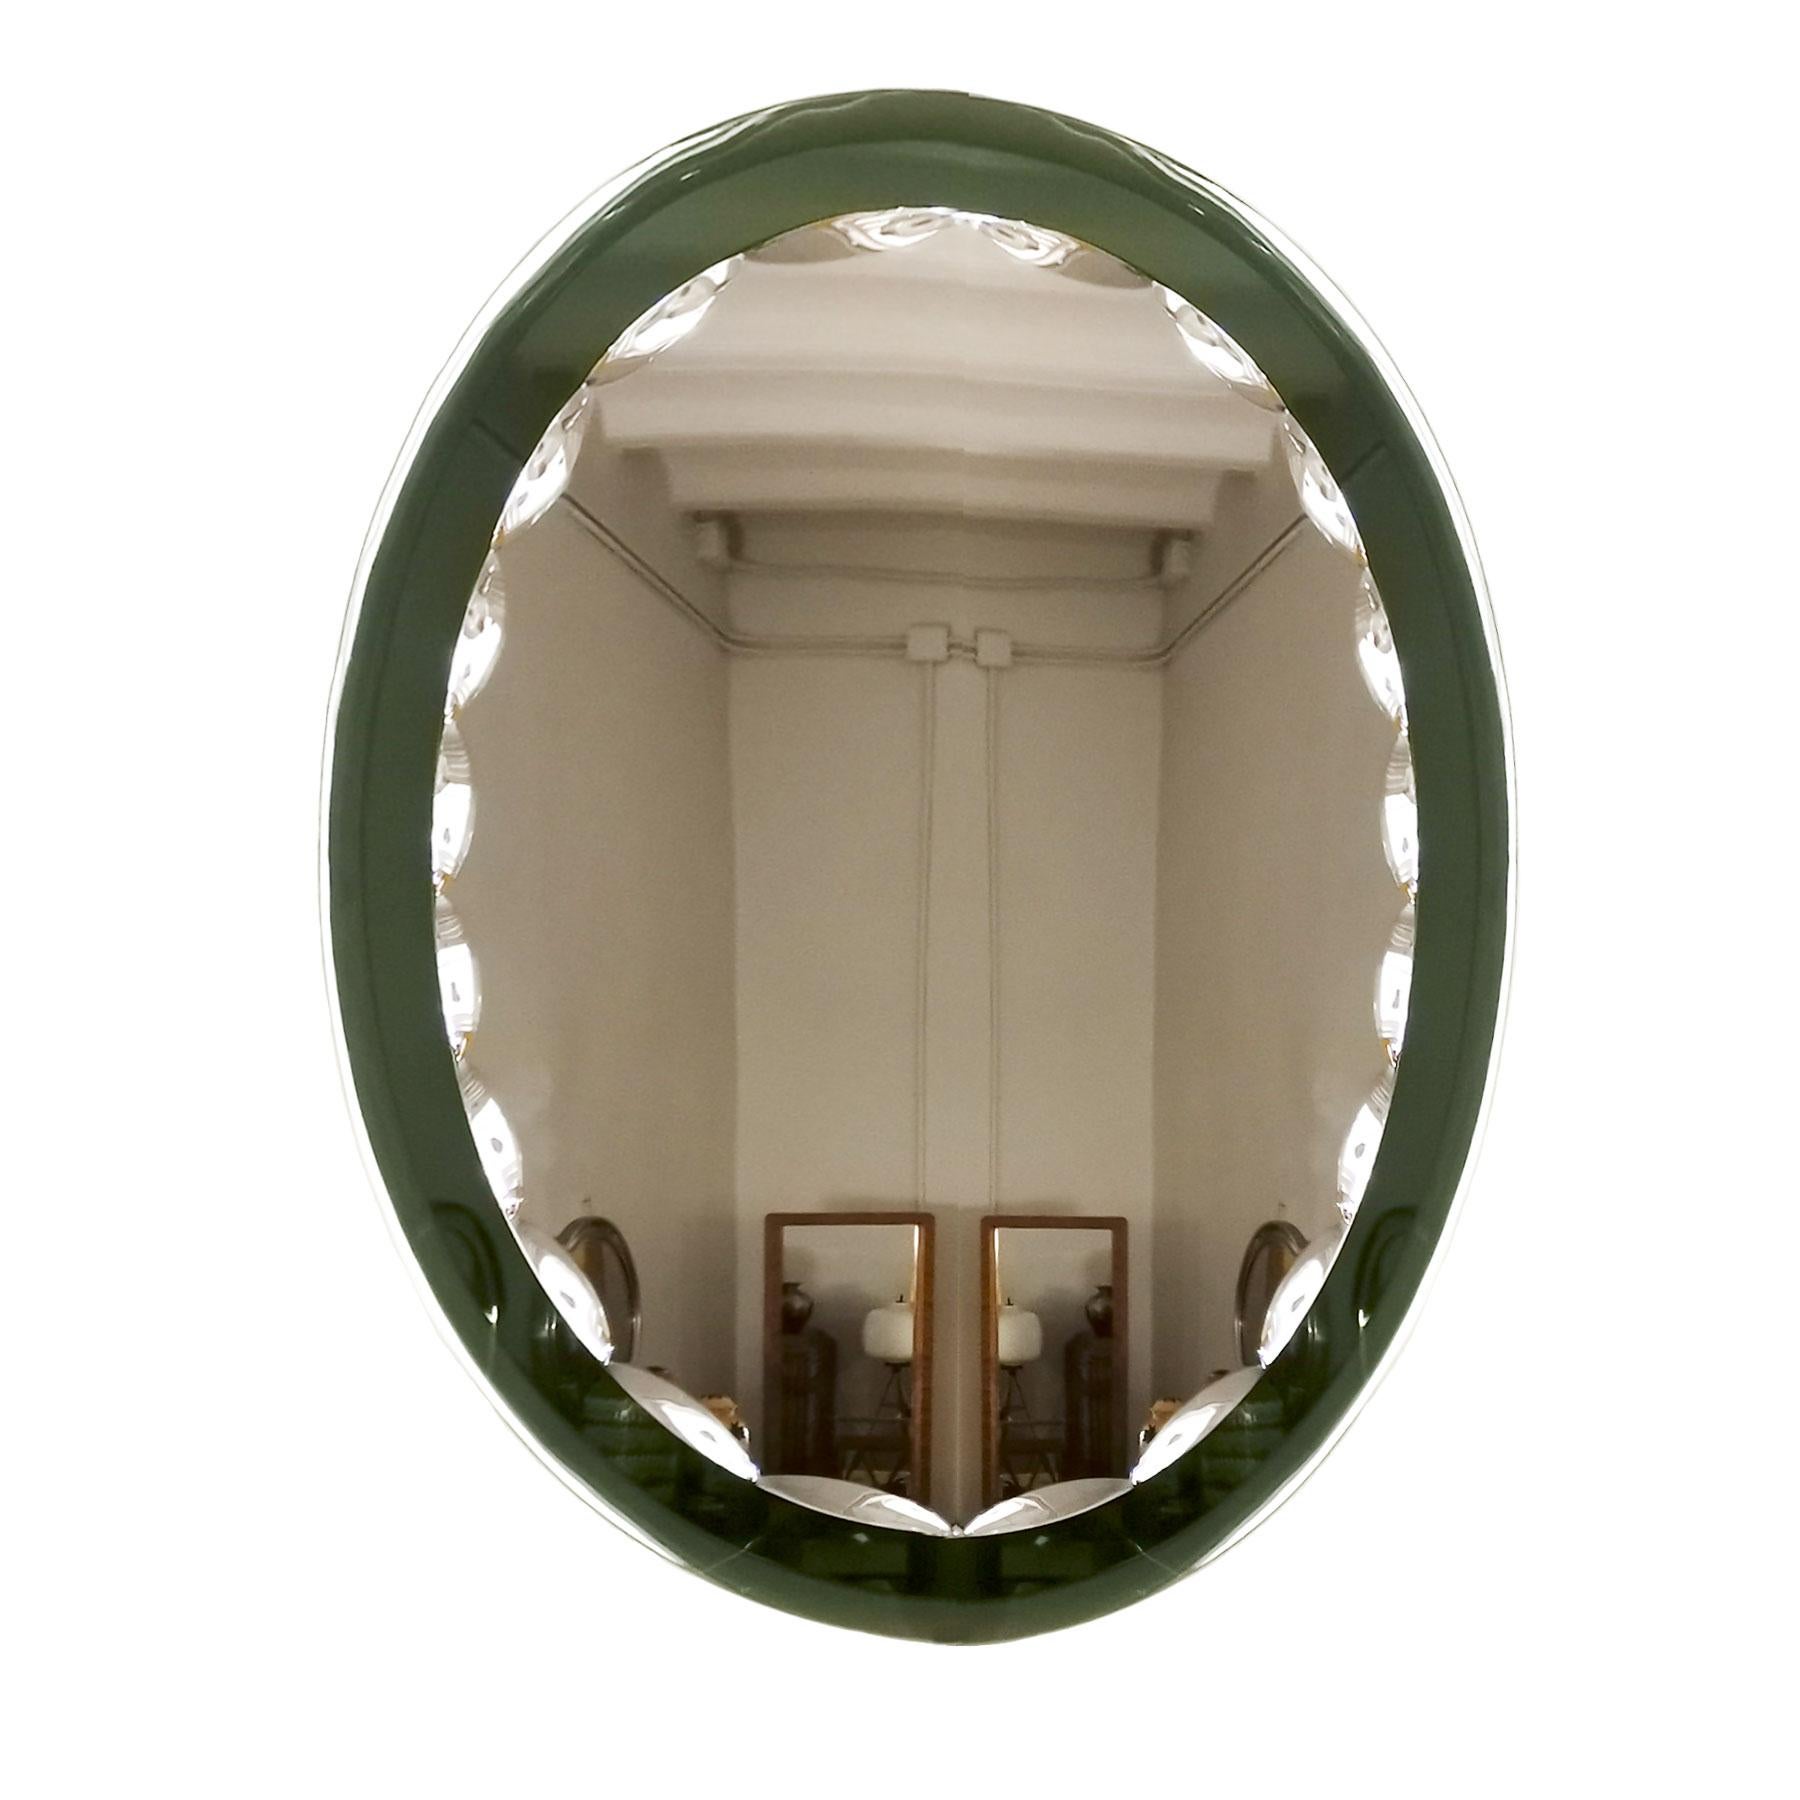 Beveled mirror with a green beveled mirror frame (little oxidation)

Italy, circa 1960.